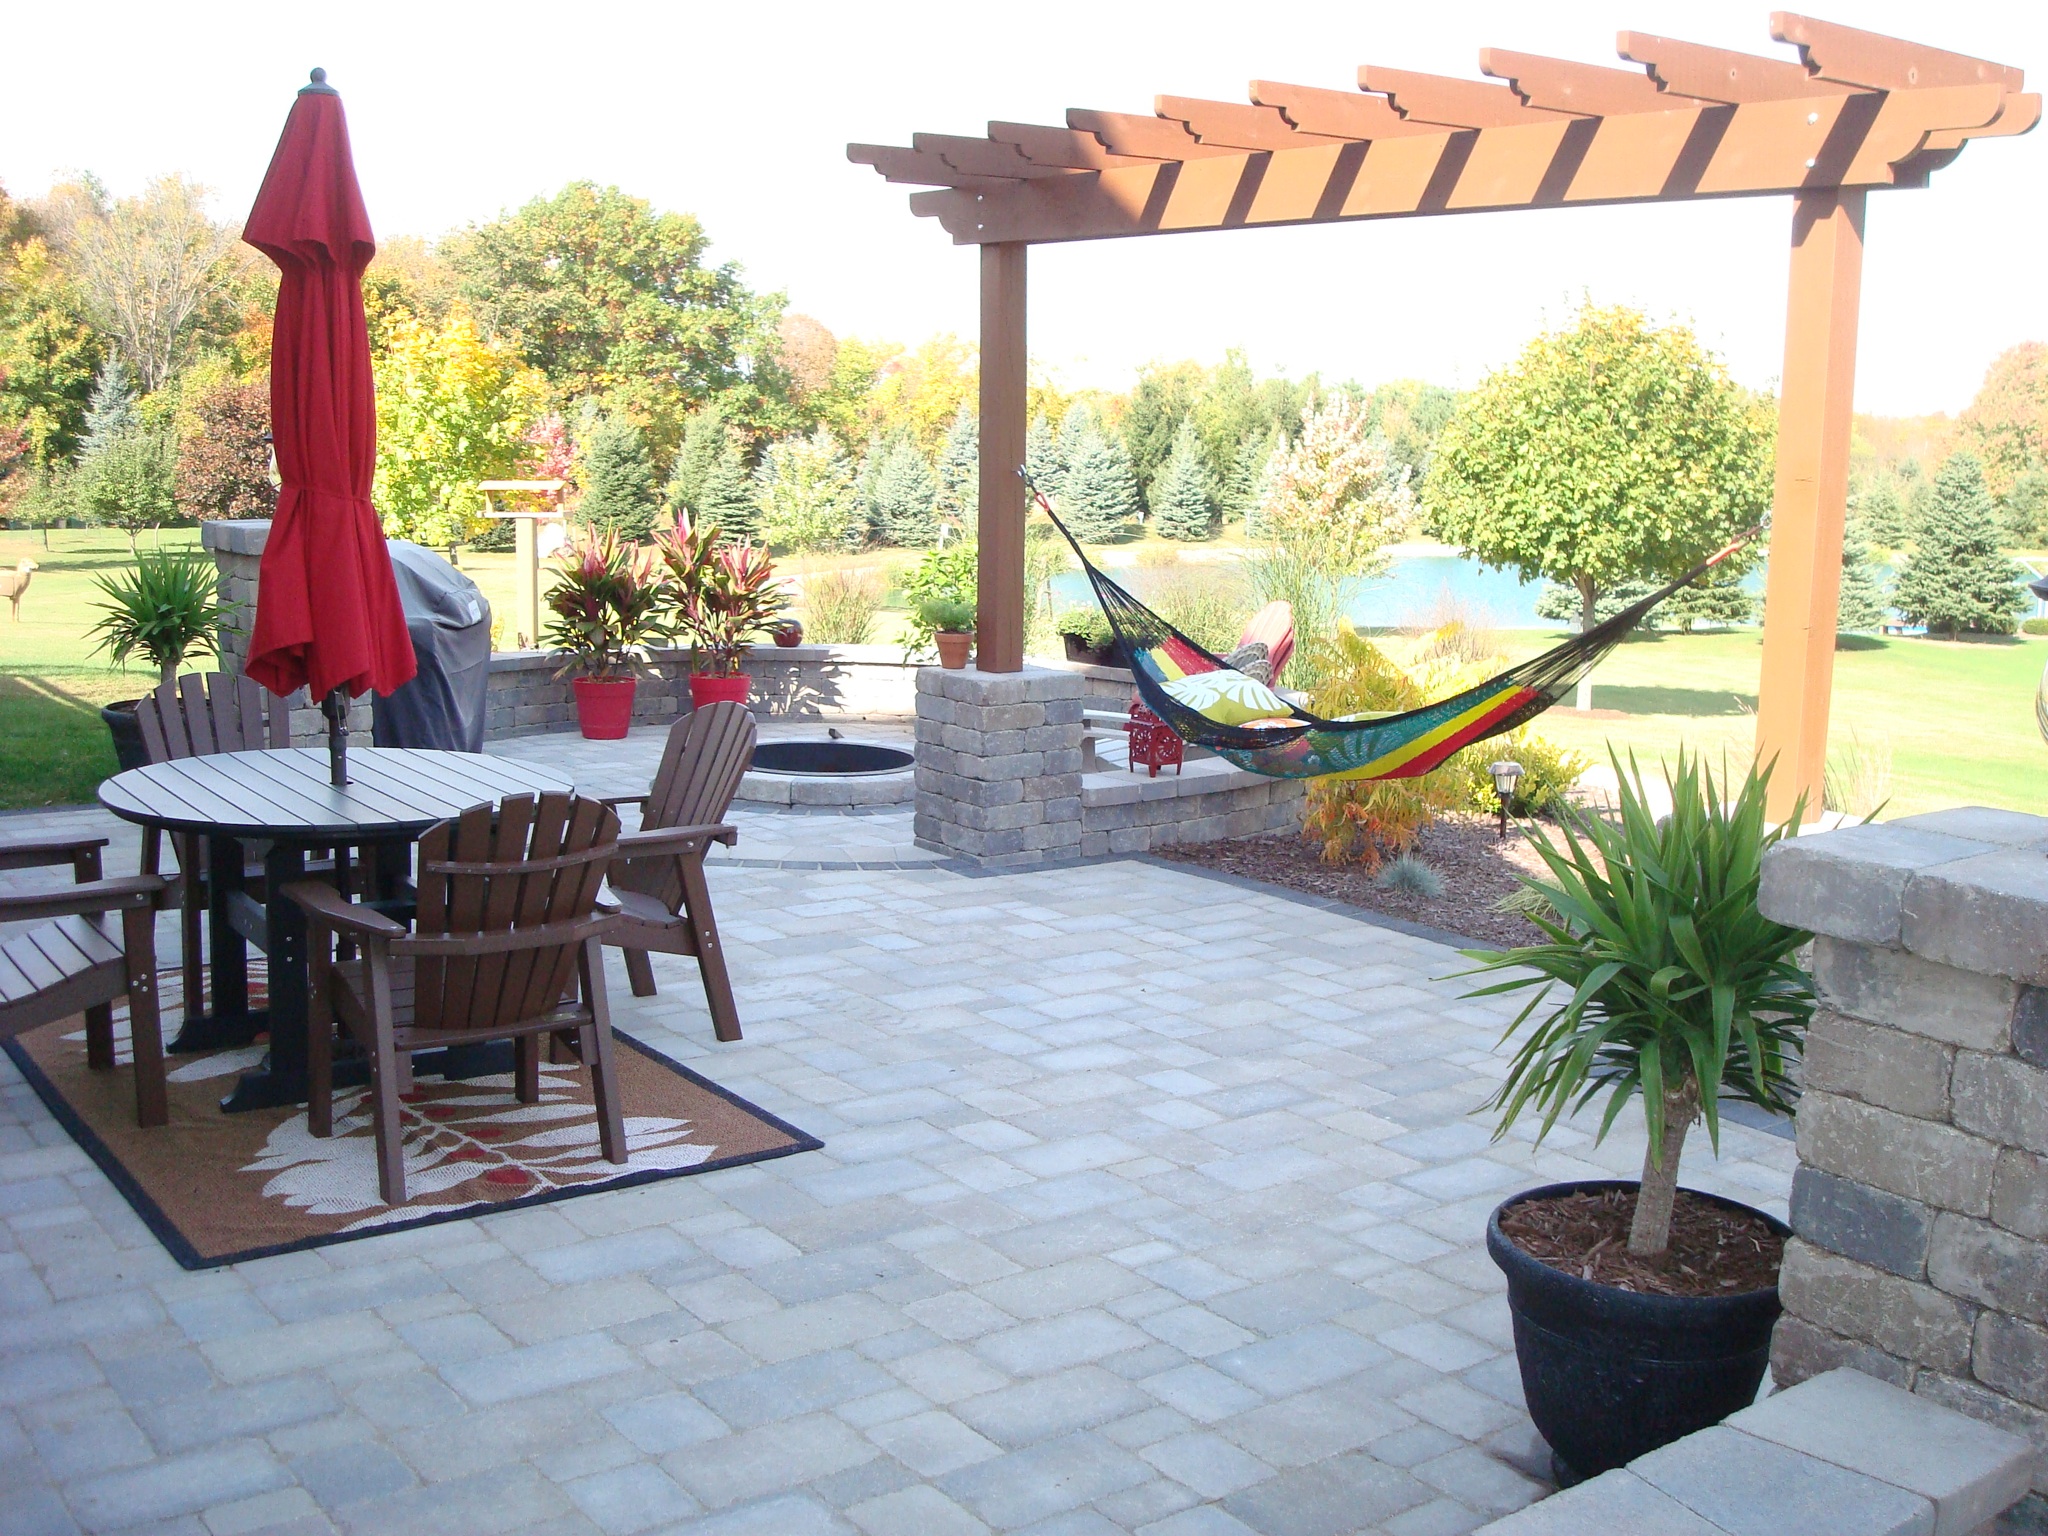 tiled patio with table, umbrella and chairs and hammock